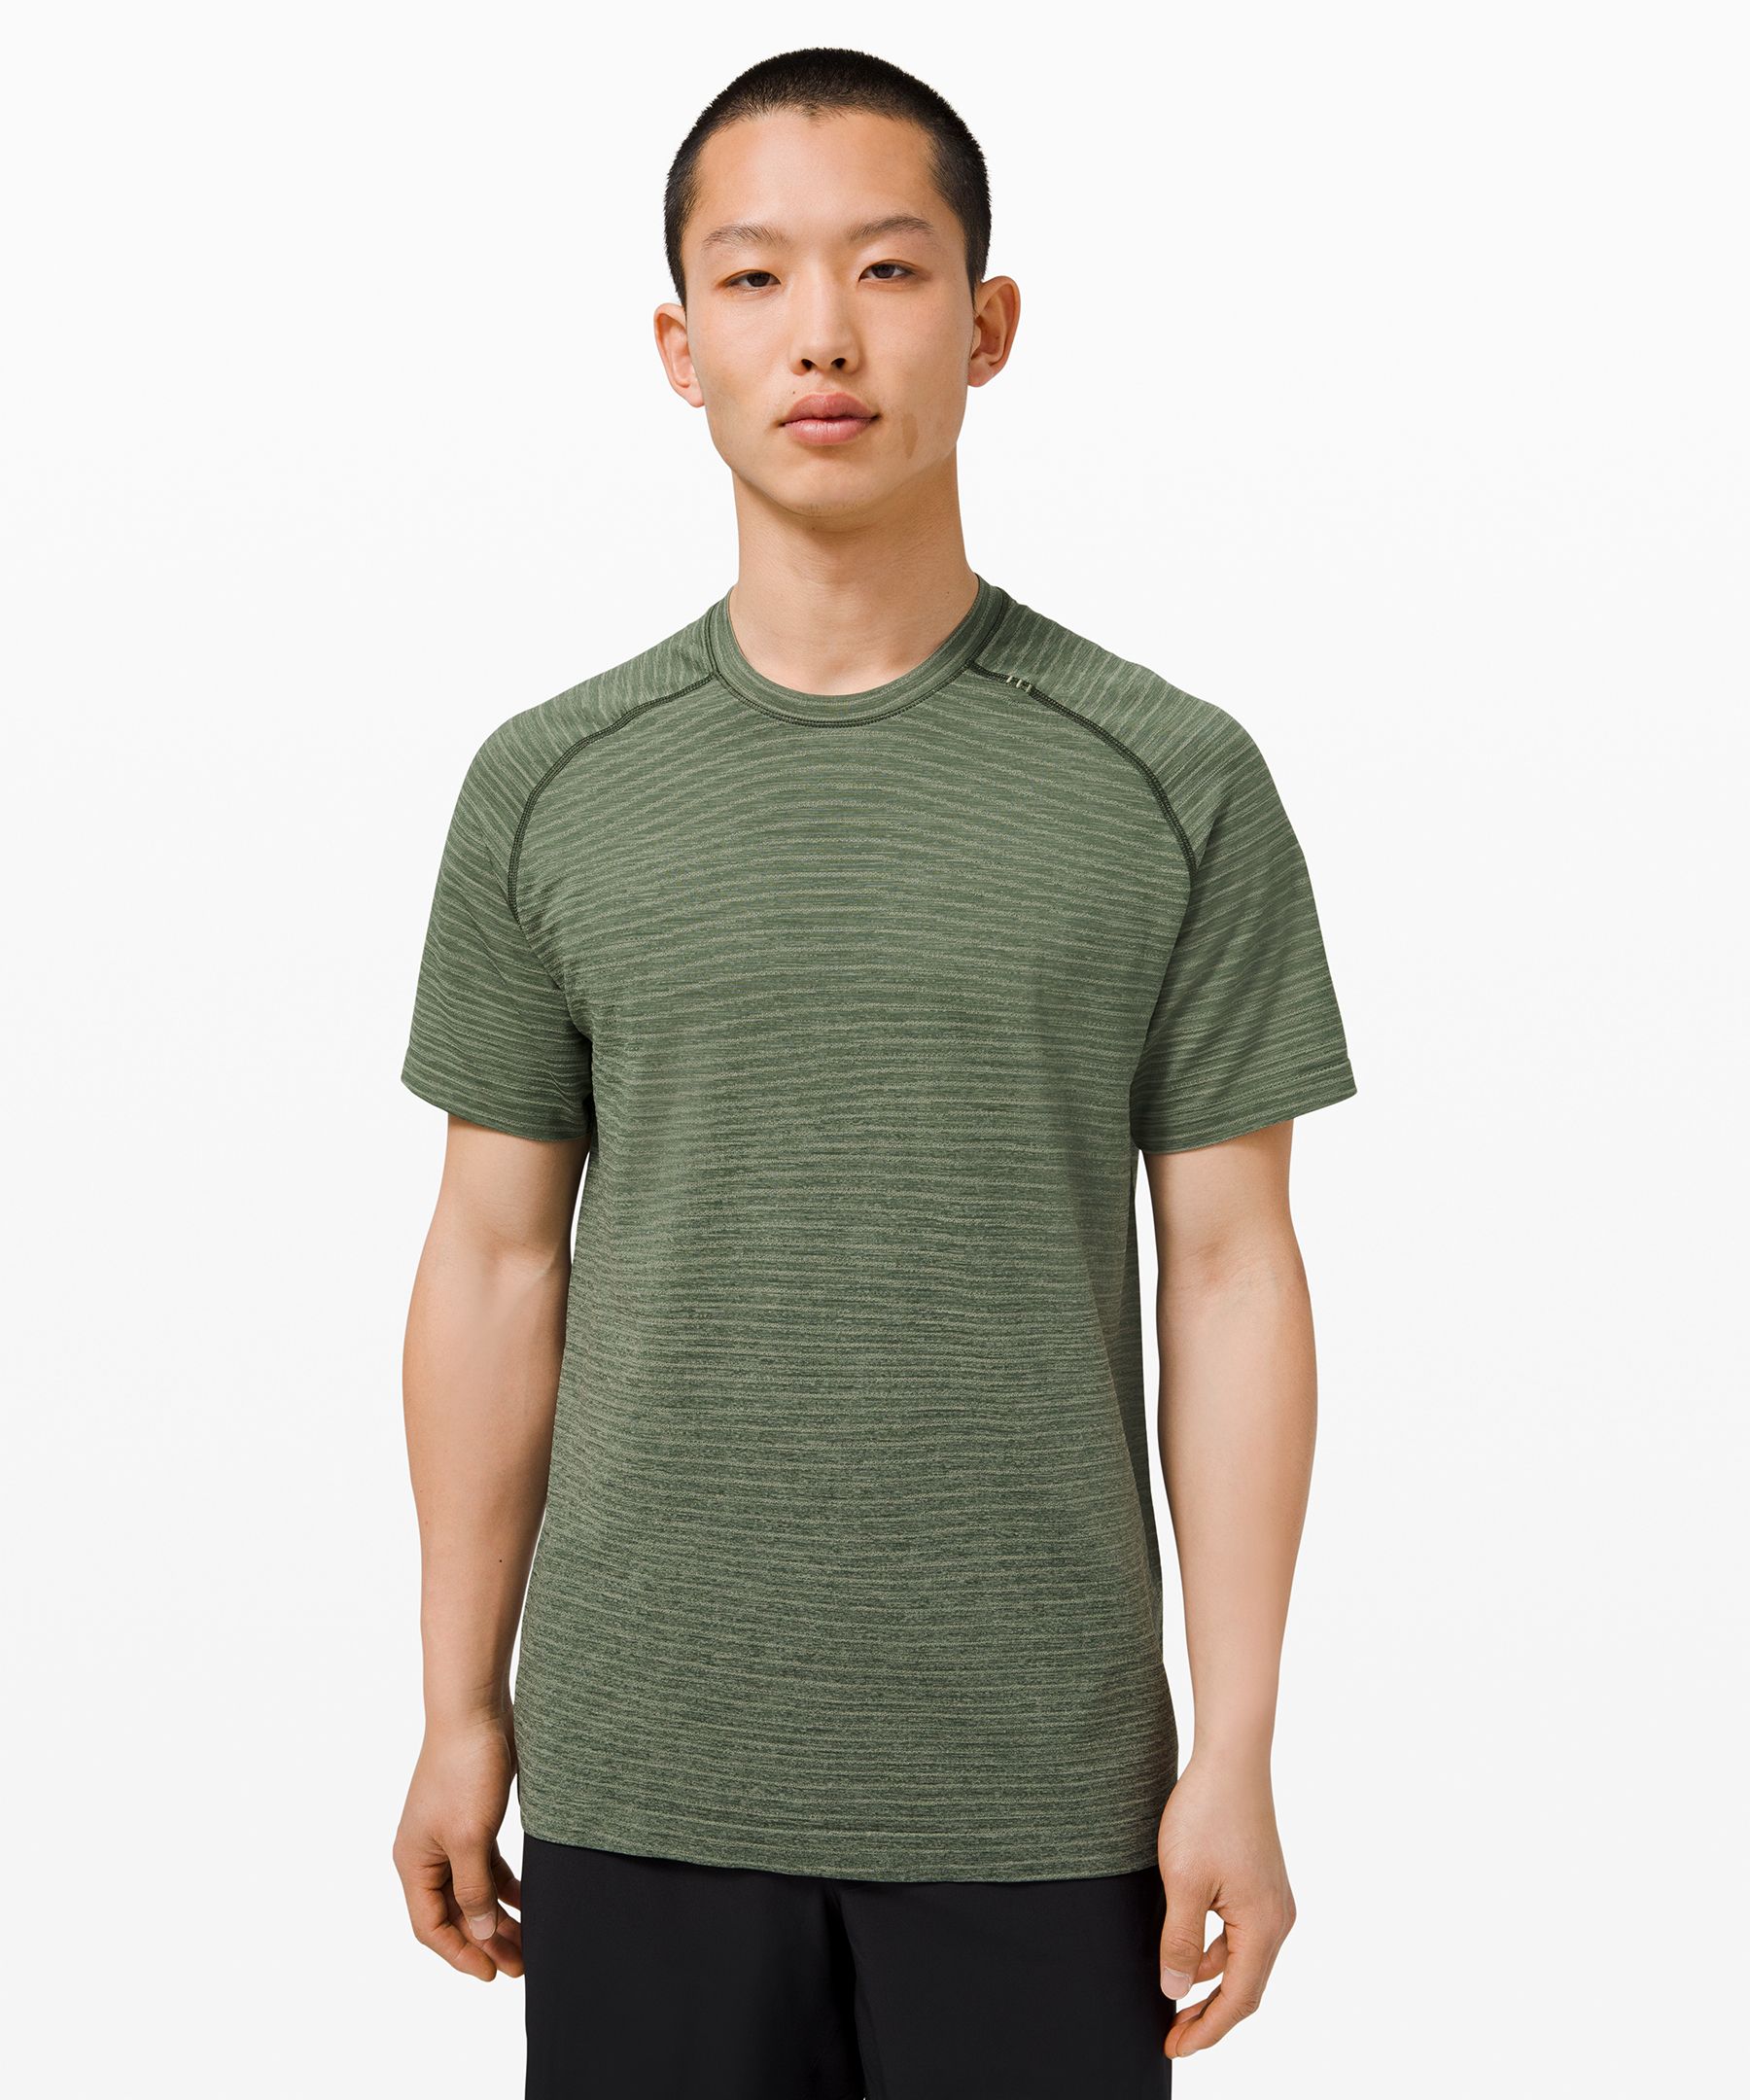 Lululemon Metal Vent Tech Short Sleeve Shirt 2.0 In Wave Fade Rosemary Green/smoked Spruce